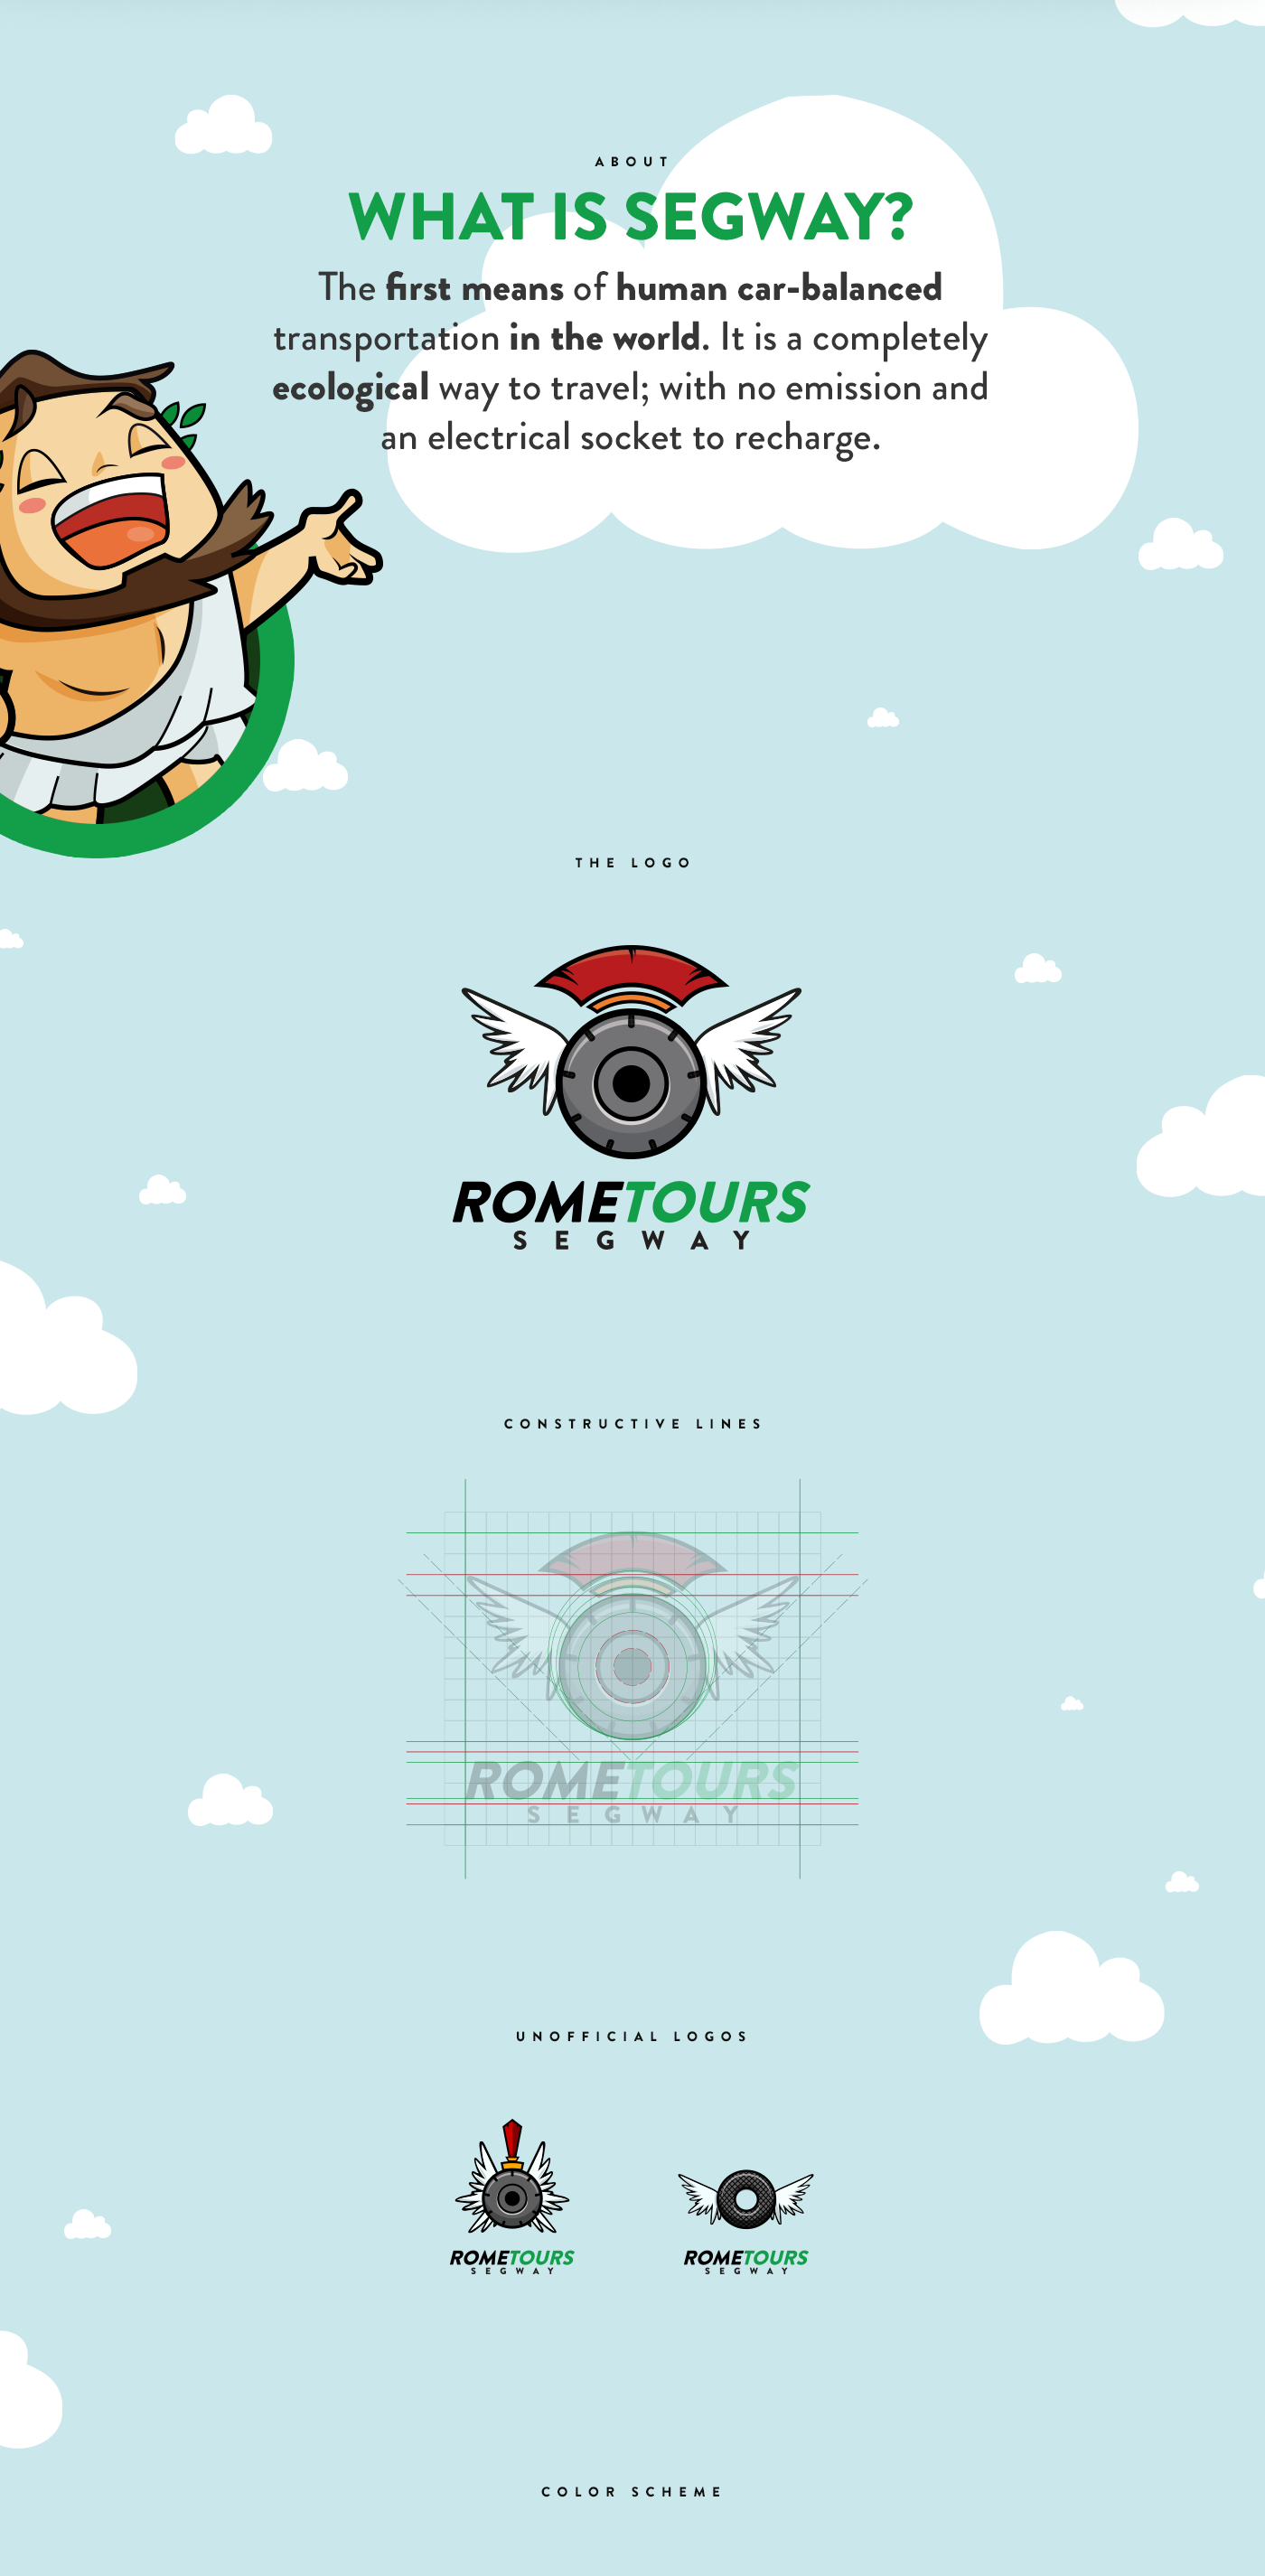 segway Rome tours brand logo Character wheel wings cartoon clouds mascotte video motion infographic gif